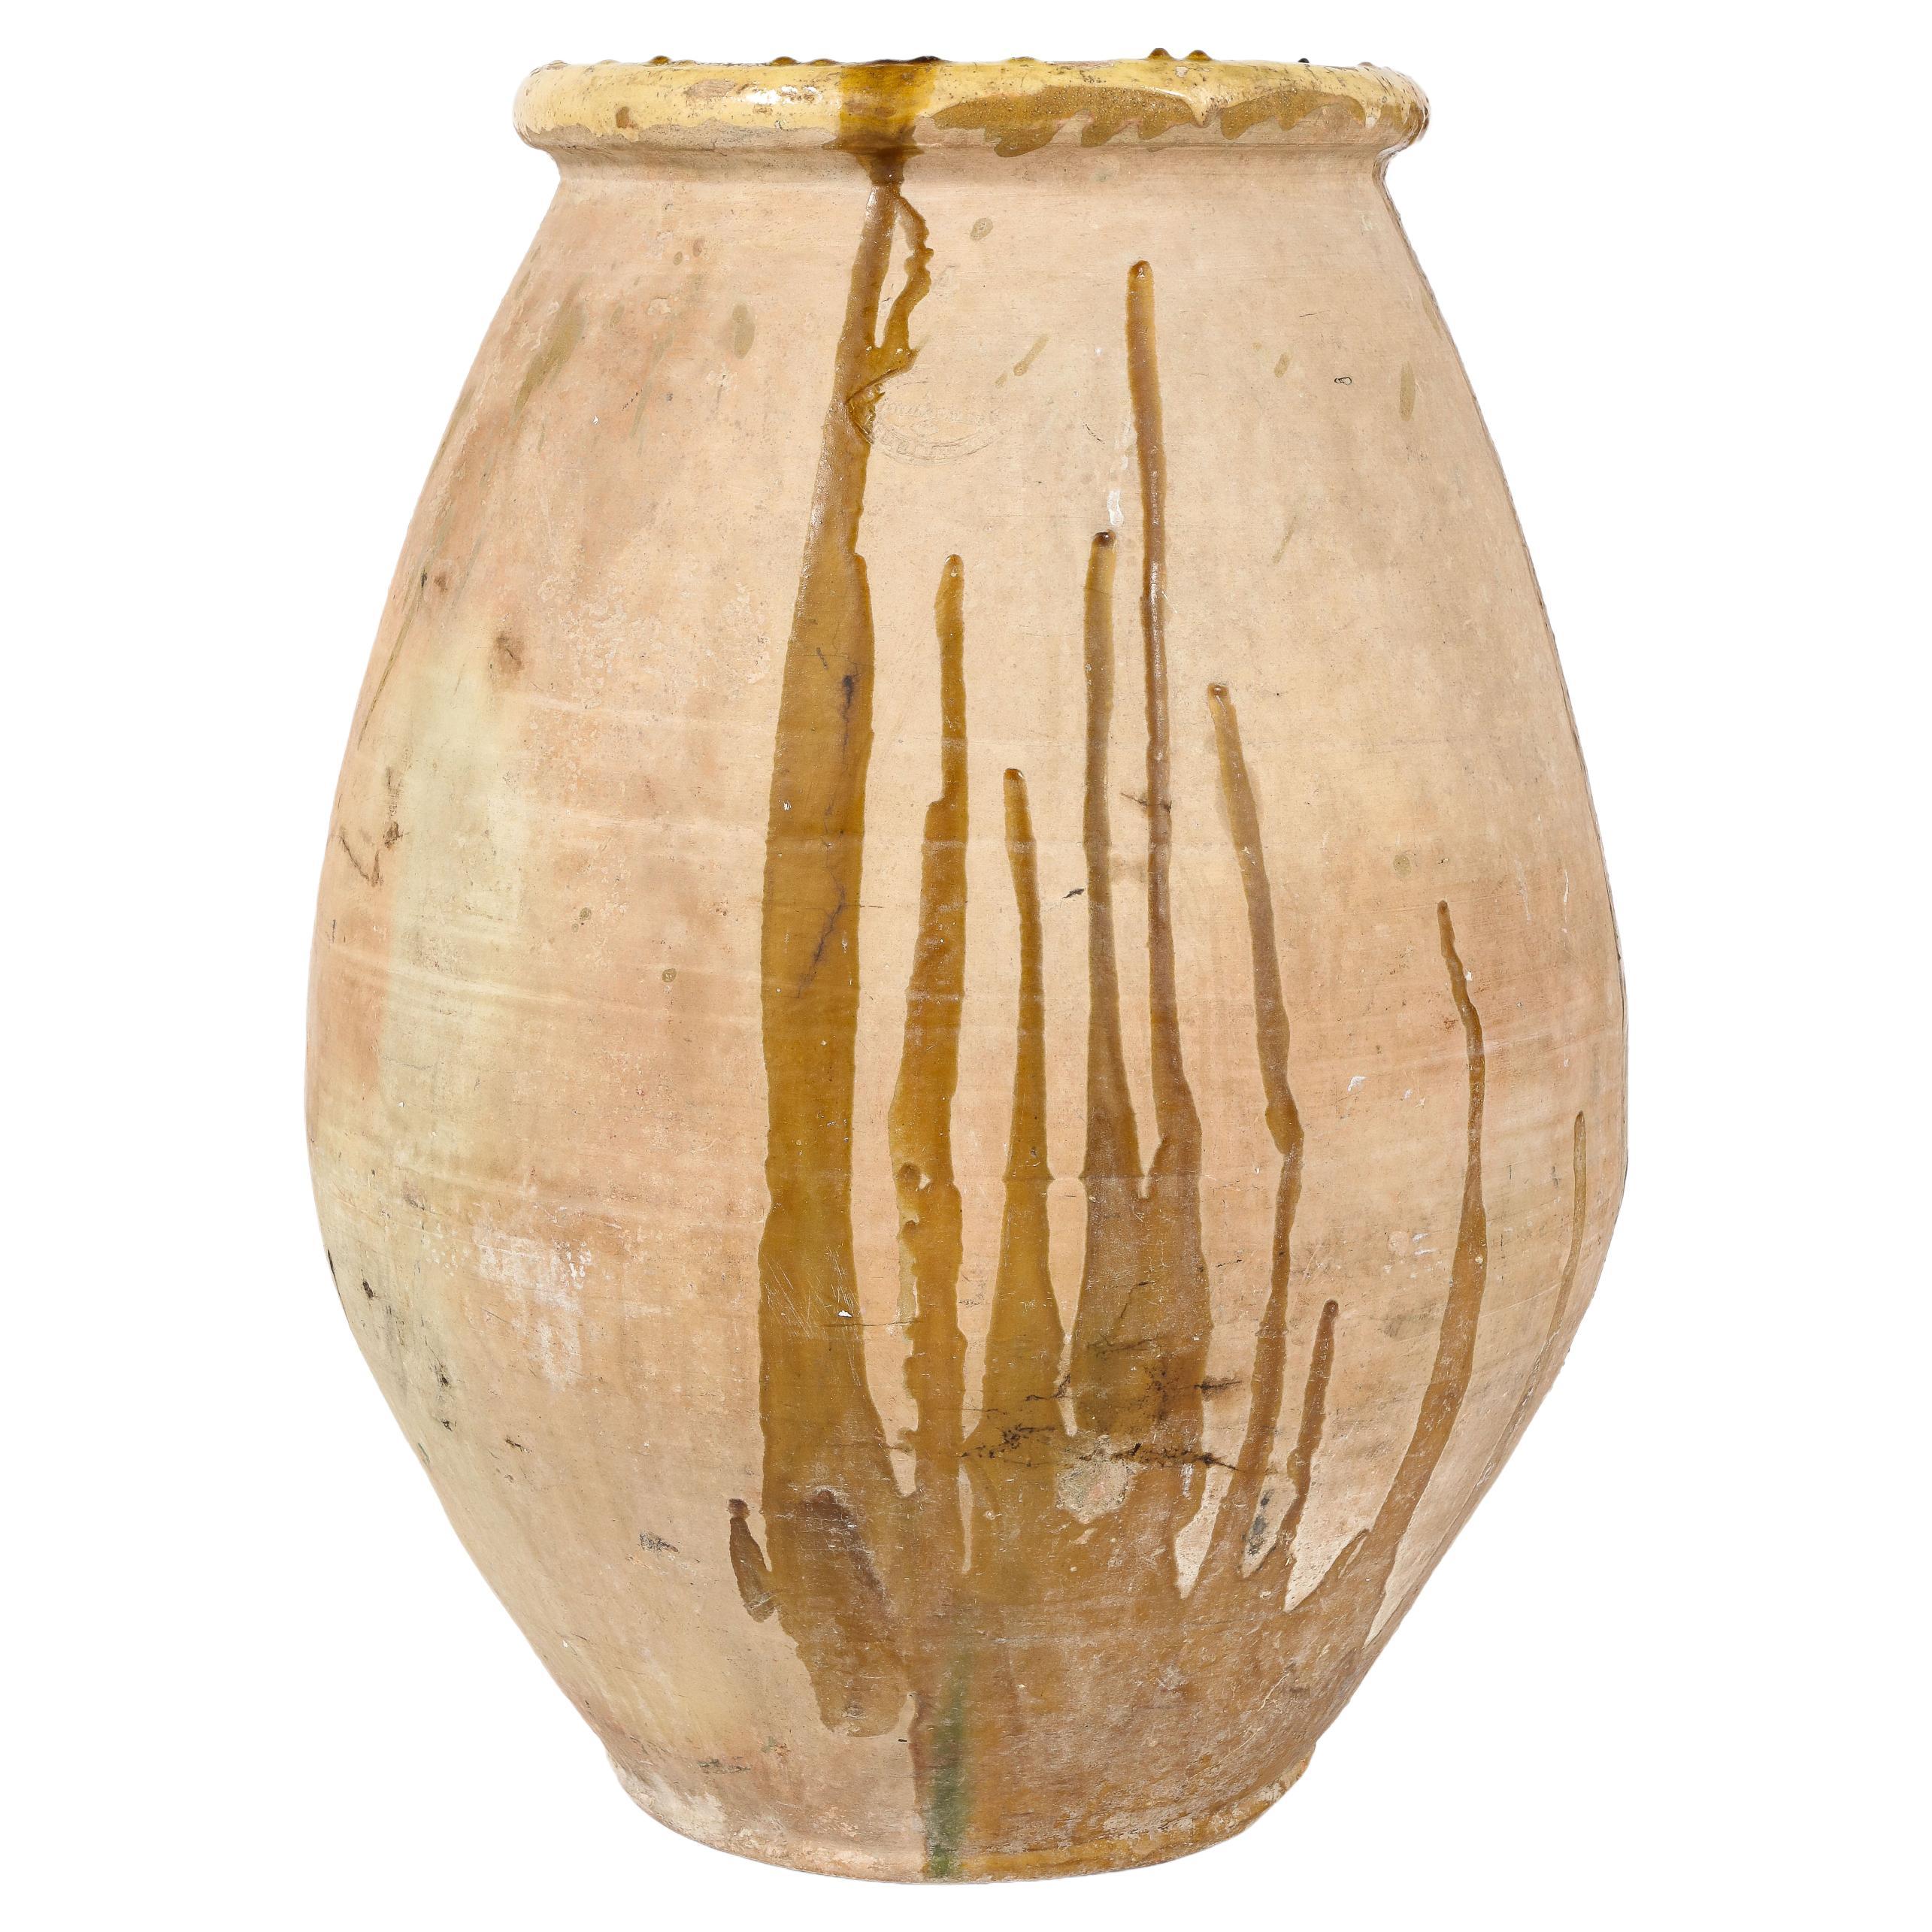 A grand scale French provincial terracotta Biot Jar produced in the Biot region of southern France. With its original yellow glazed rim and traces of ochre colored glaze dripping throughout, creating a beautiful and unique abstract design.  These